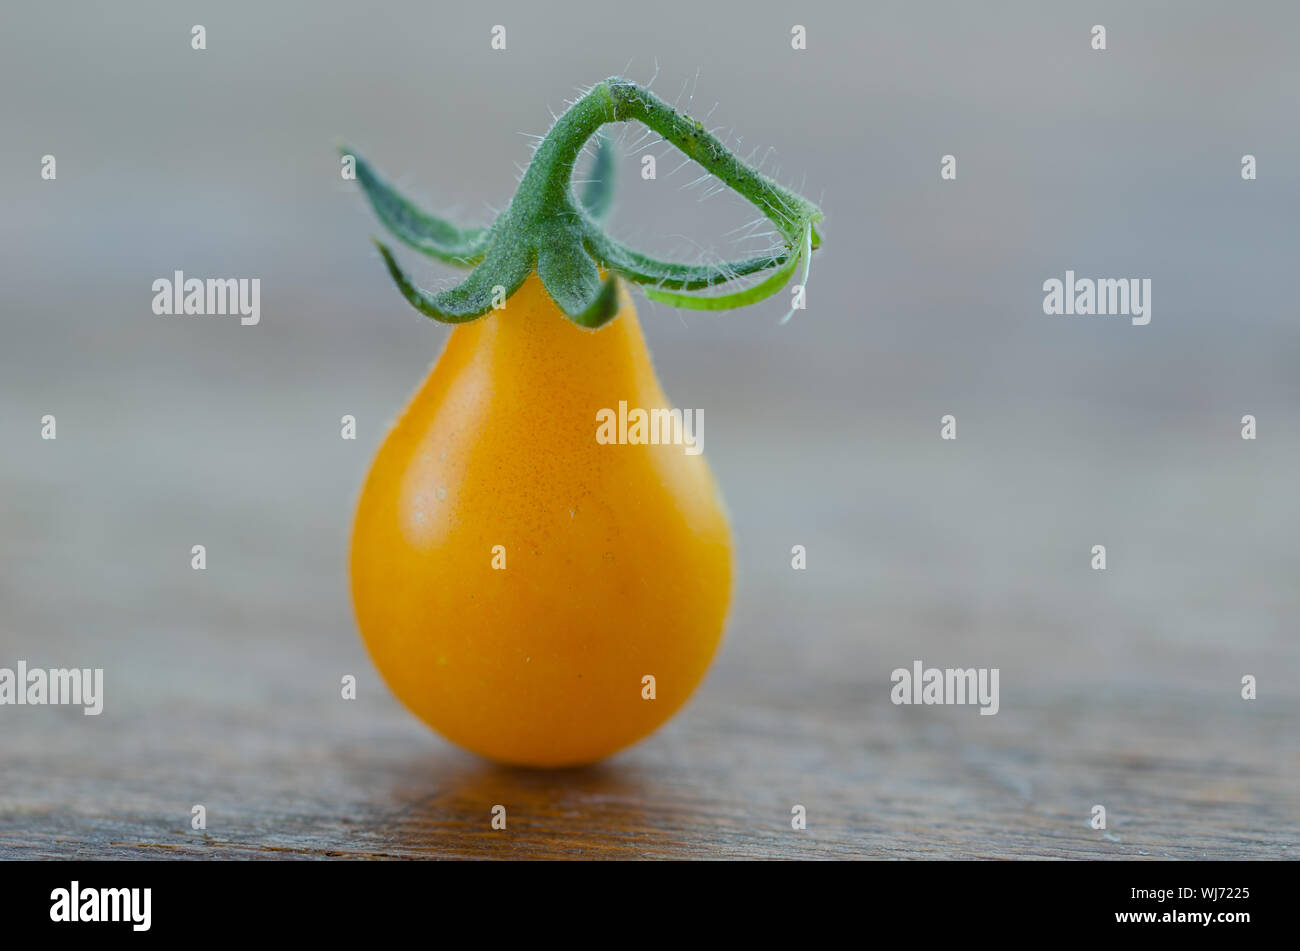 Yellow pear tomato on wooden table,close up, Stock Photo